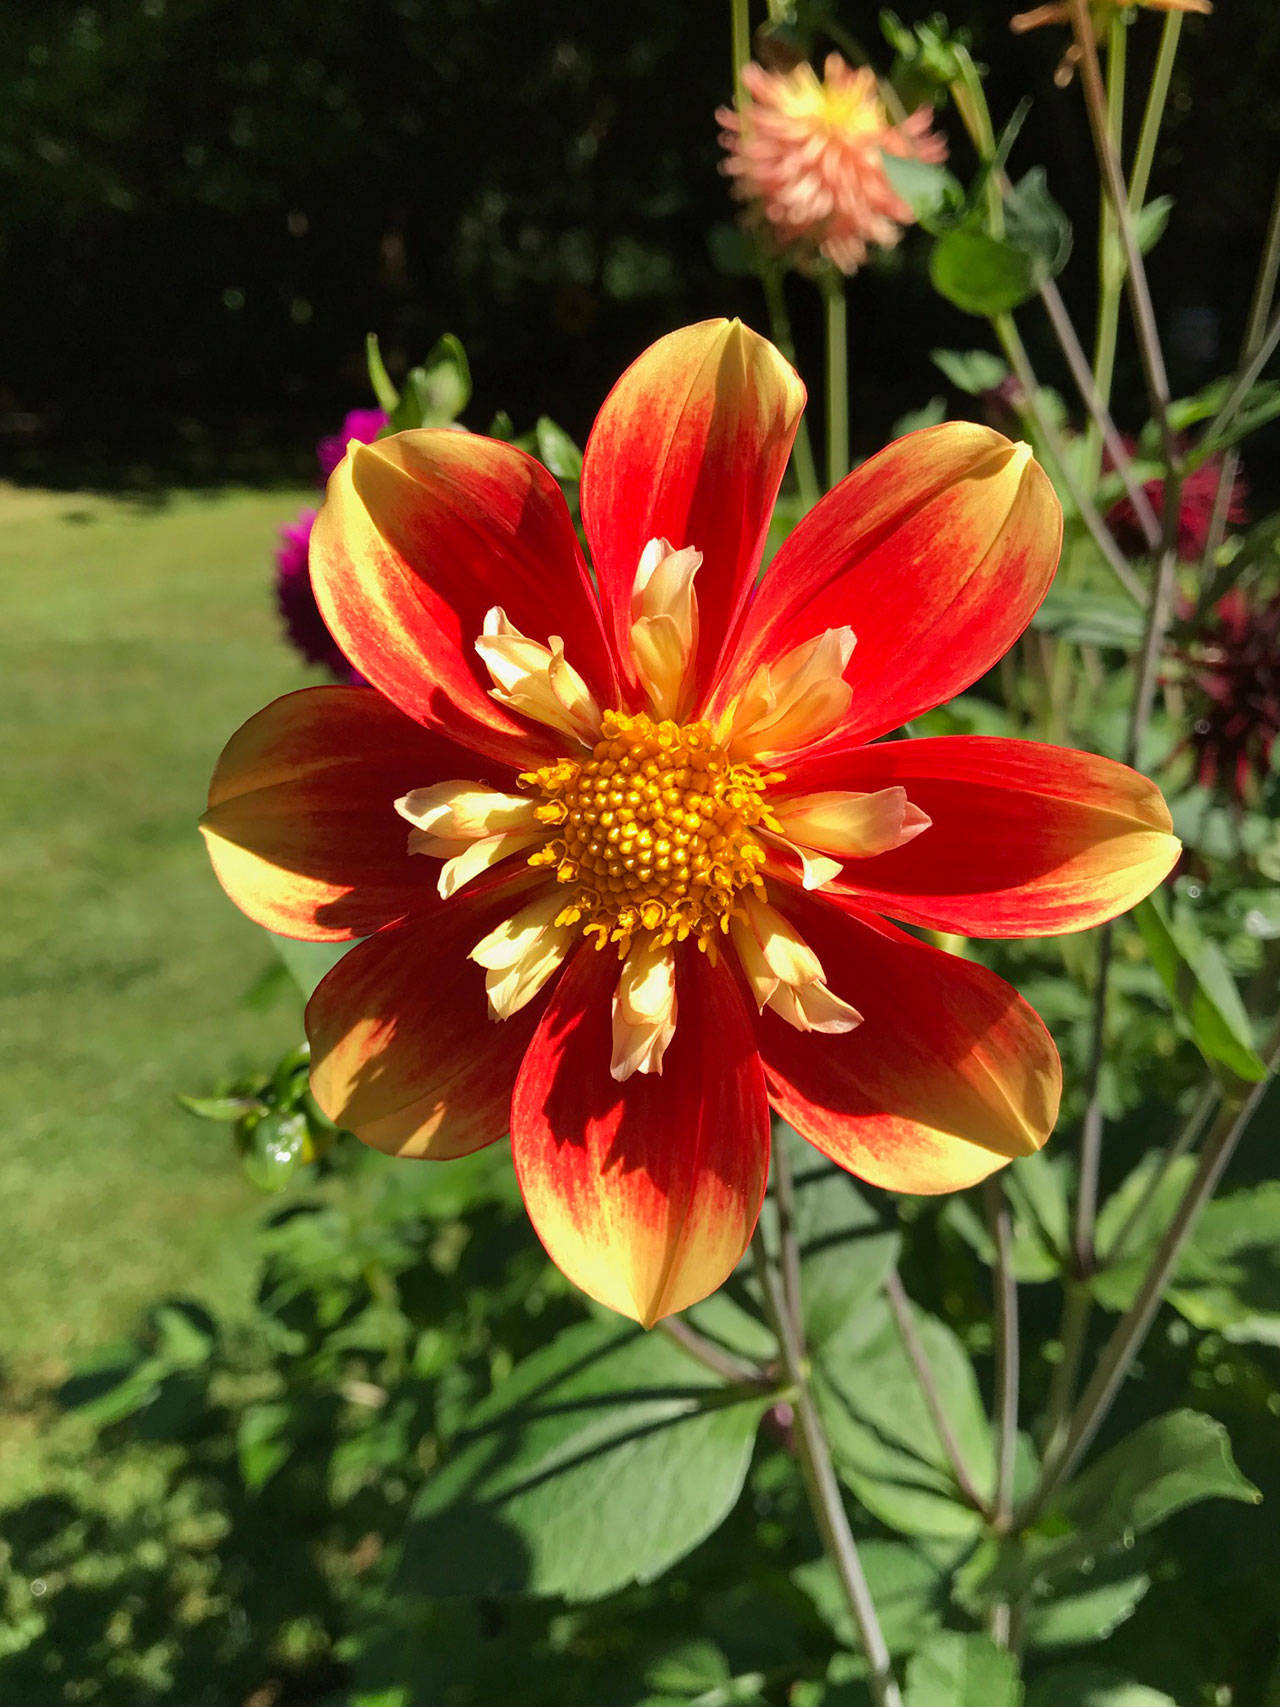 Dahlias: It’s the variety that lures them in